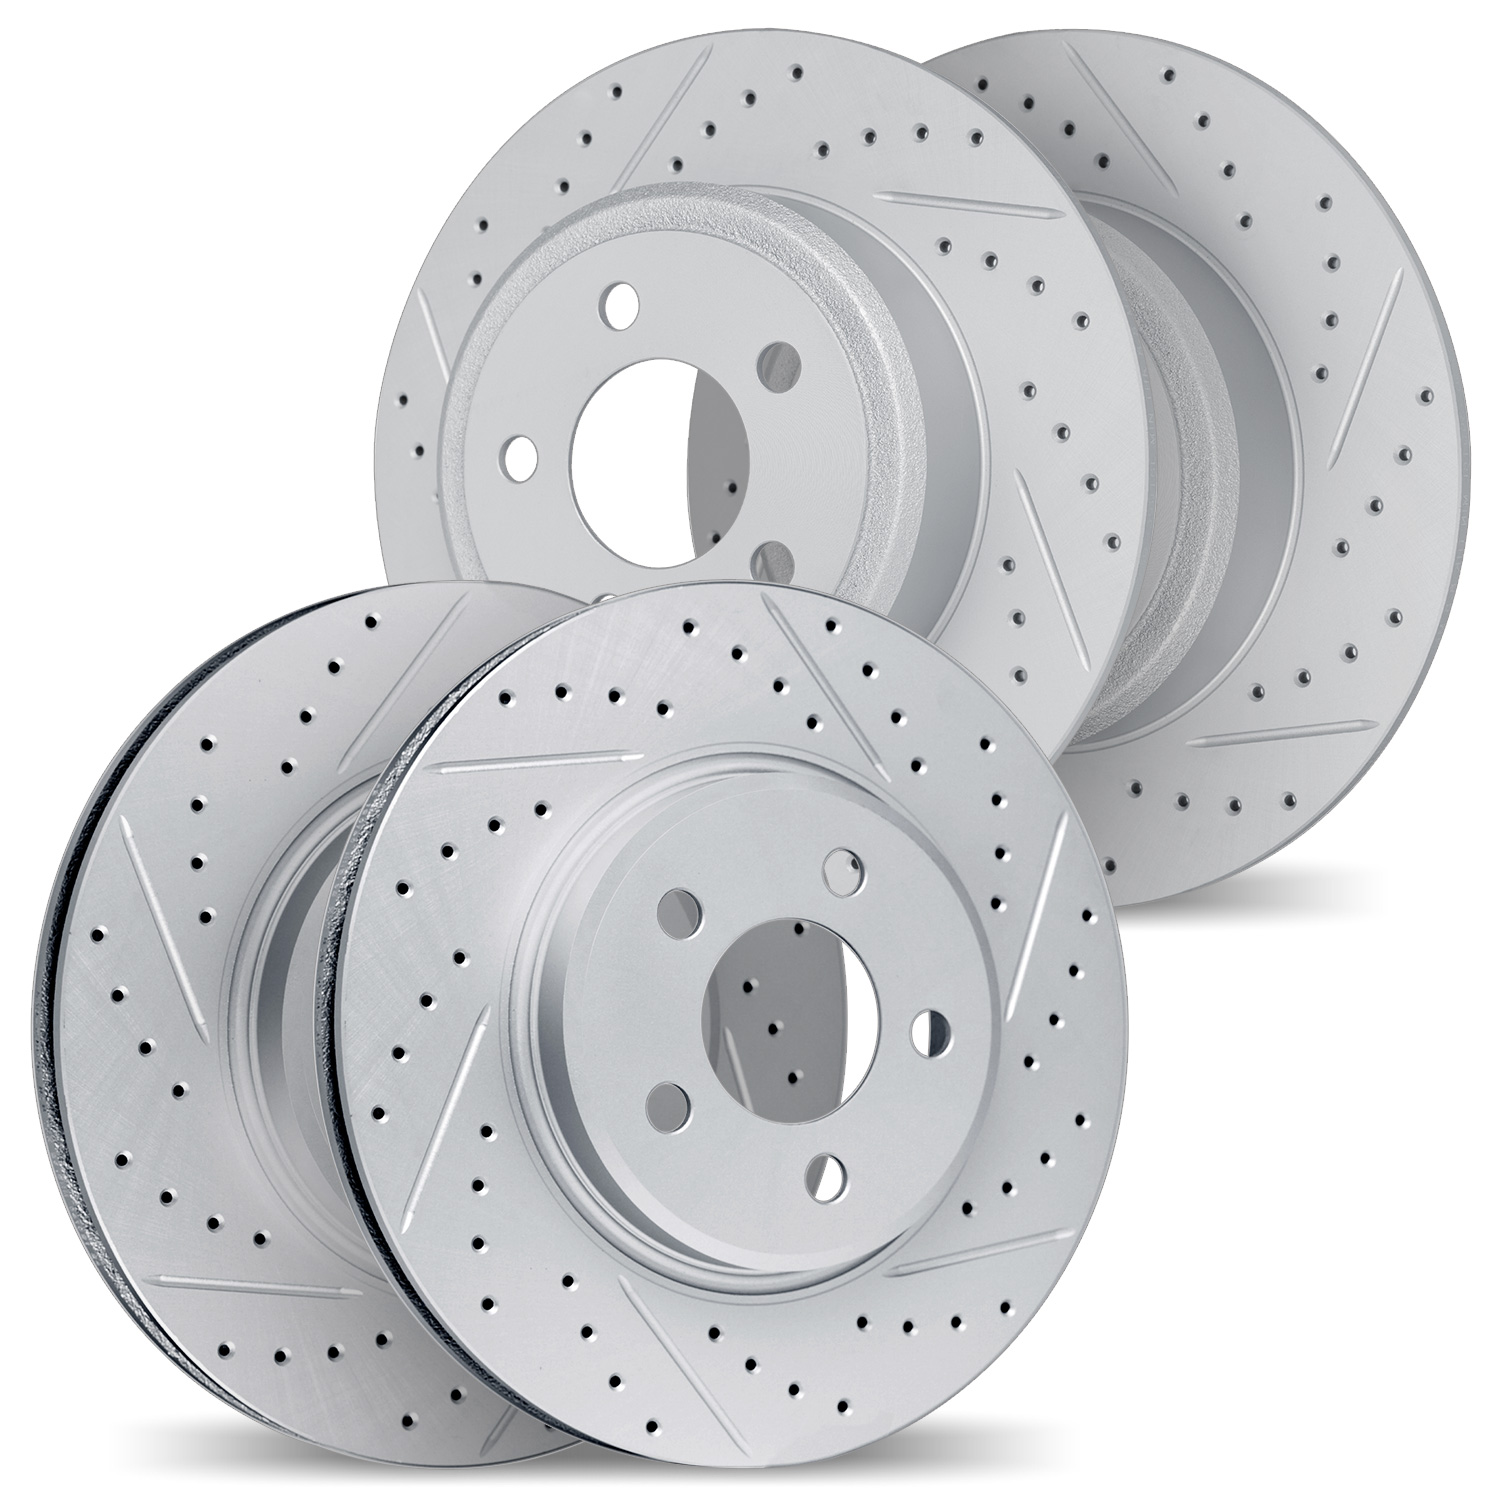 2004-03050 Geoperformance Drilled/Slotted Brake Rotors, 2010-2016 Kia/Hyundai/Genesis, Position: Front and Rear